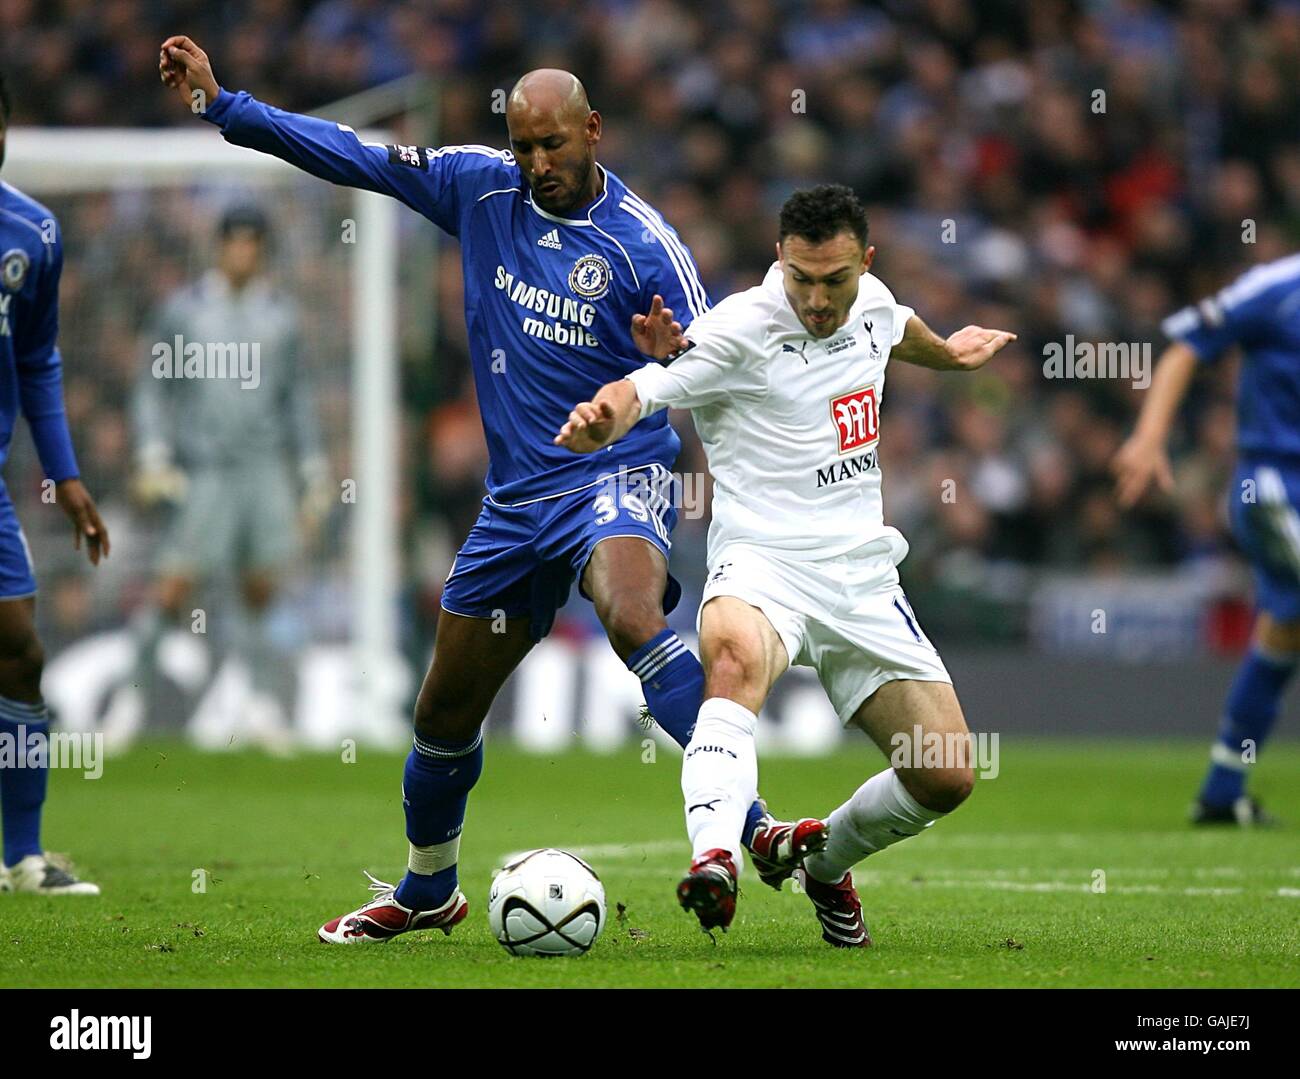 Soccer - Carling Cup - Final - Chelsea v Tottenham Hotspur - Wembley Stadium. Chelsea's Nicolas Anelka (l) and Tottenham Hotspur's Steed Malbranque battle for the ball Stock Photo